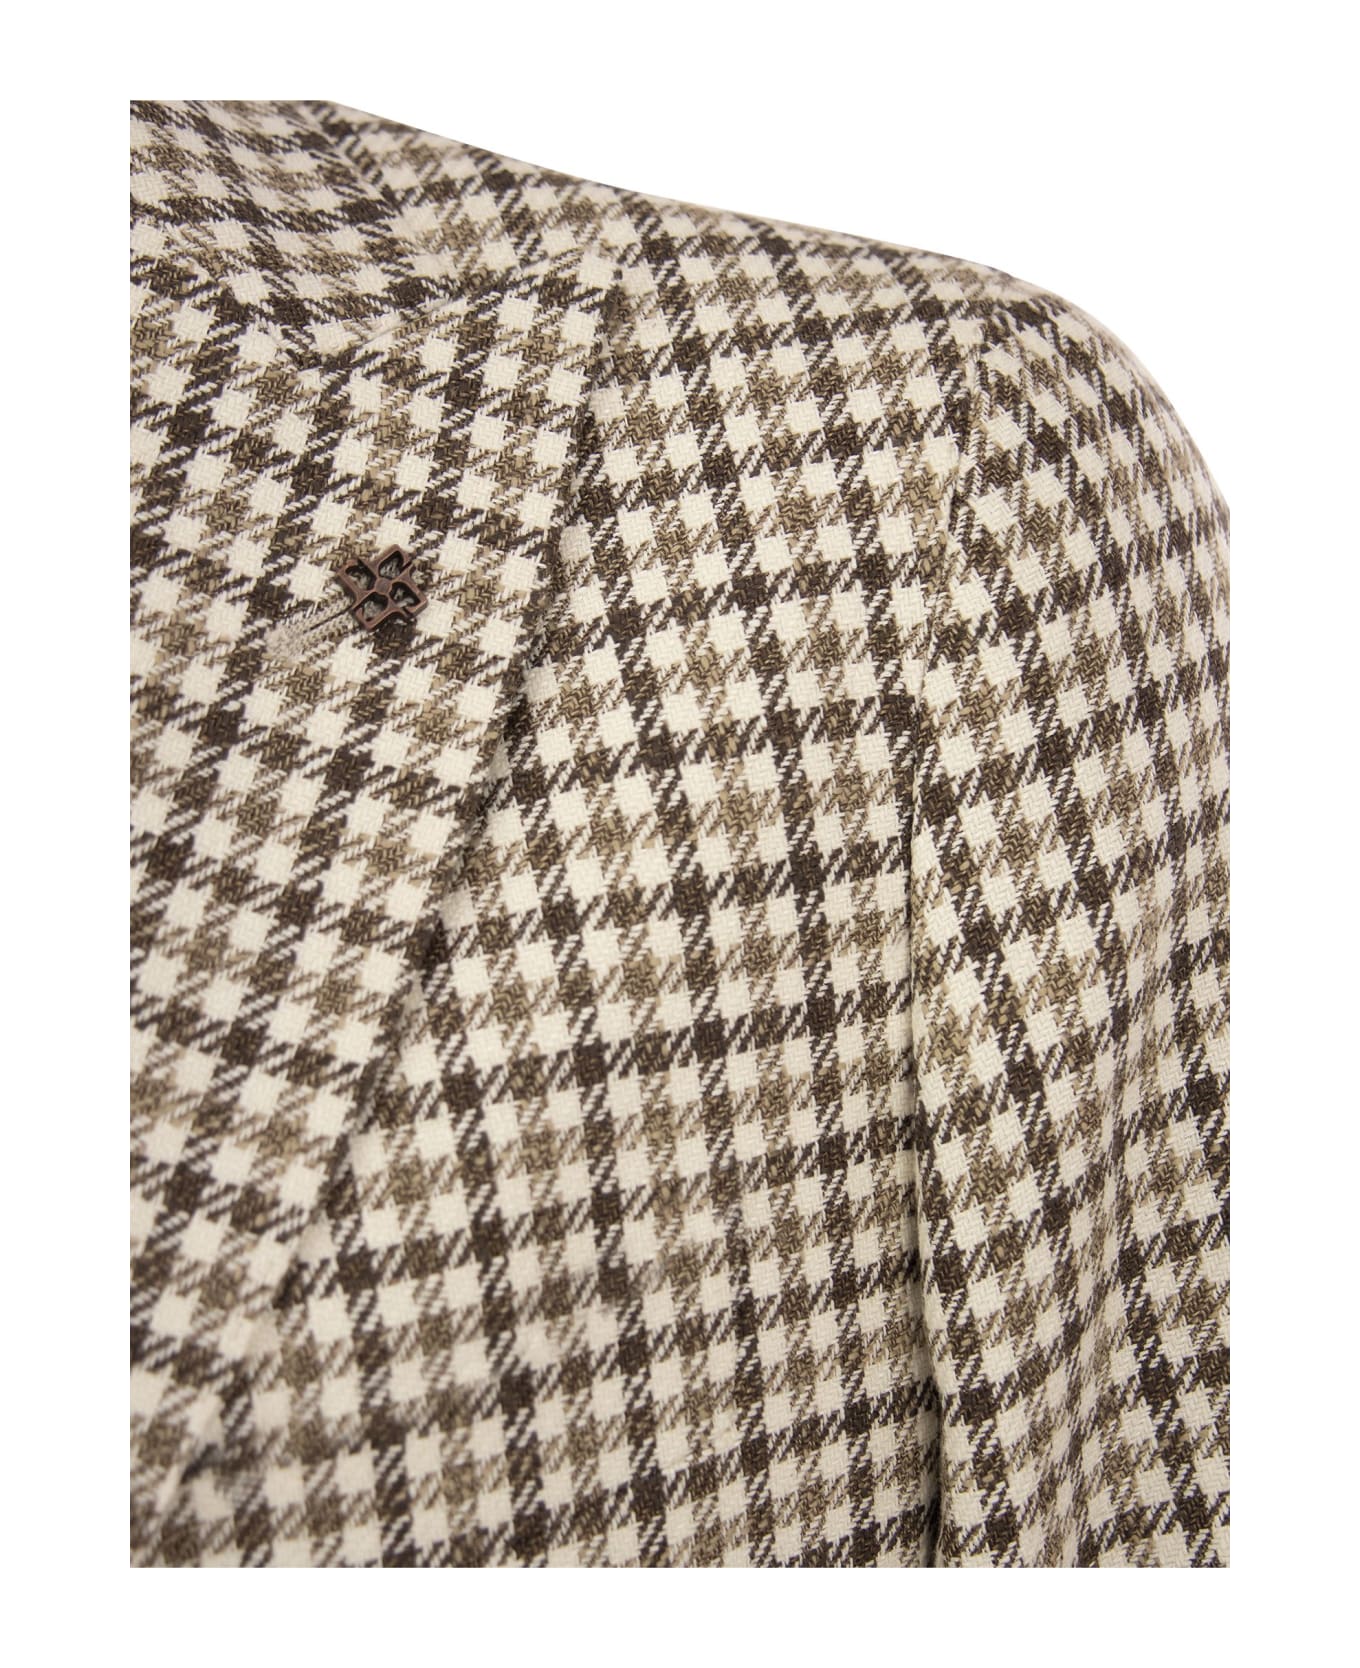 Tagliatore Jacket With Checked Pattern - Sand